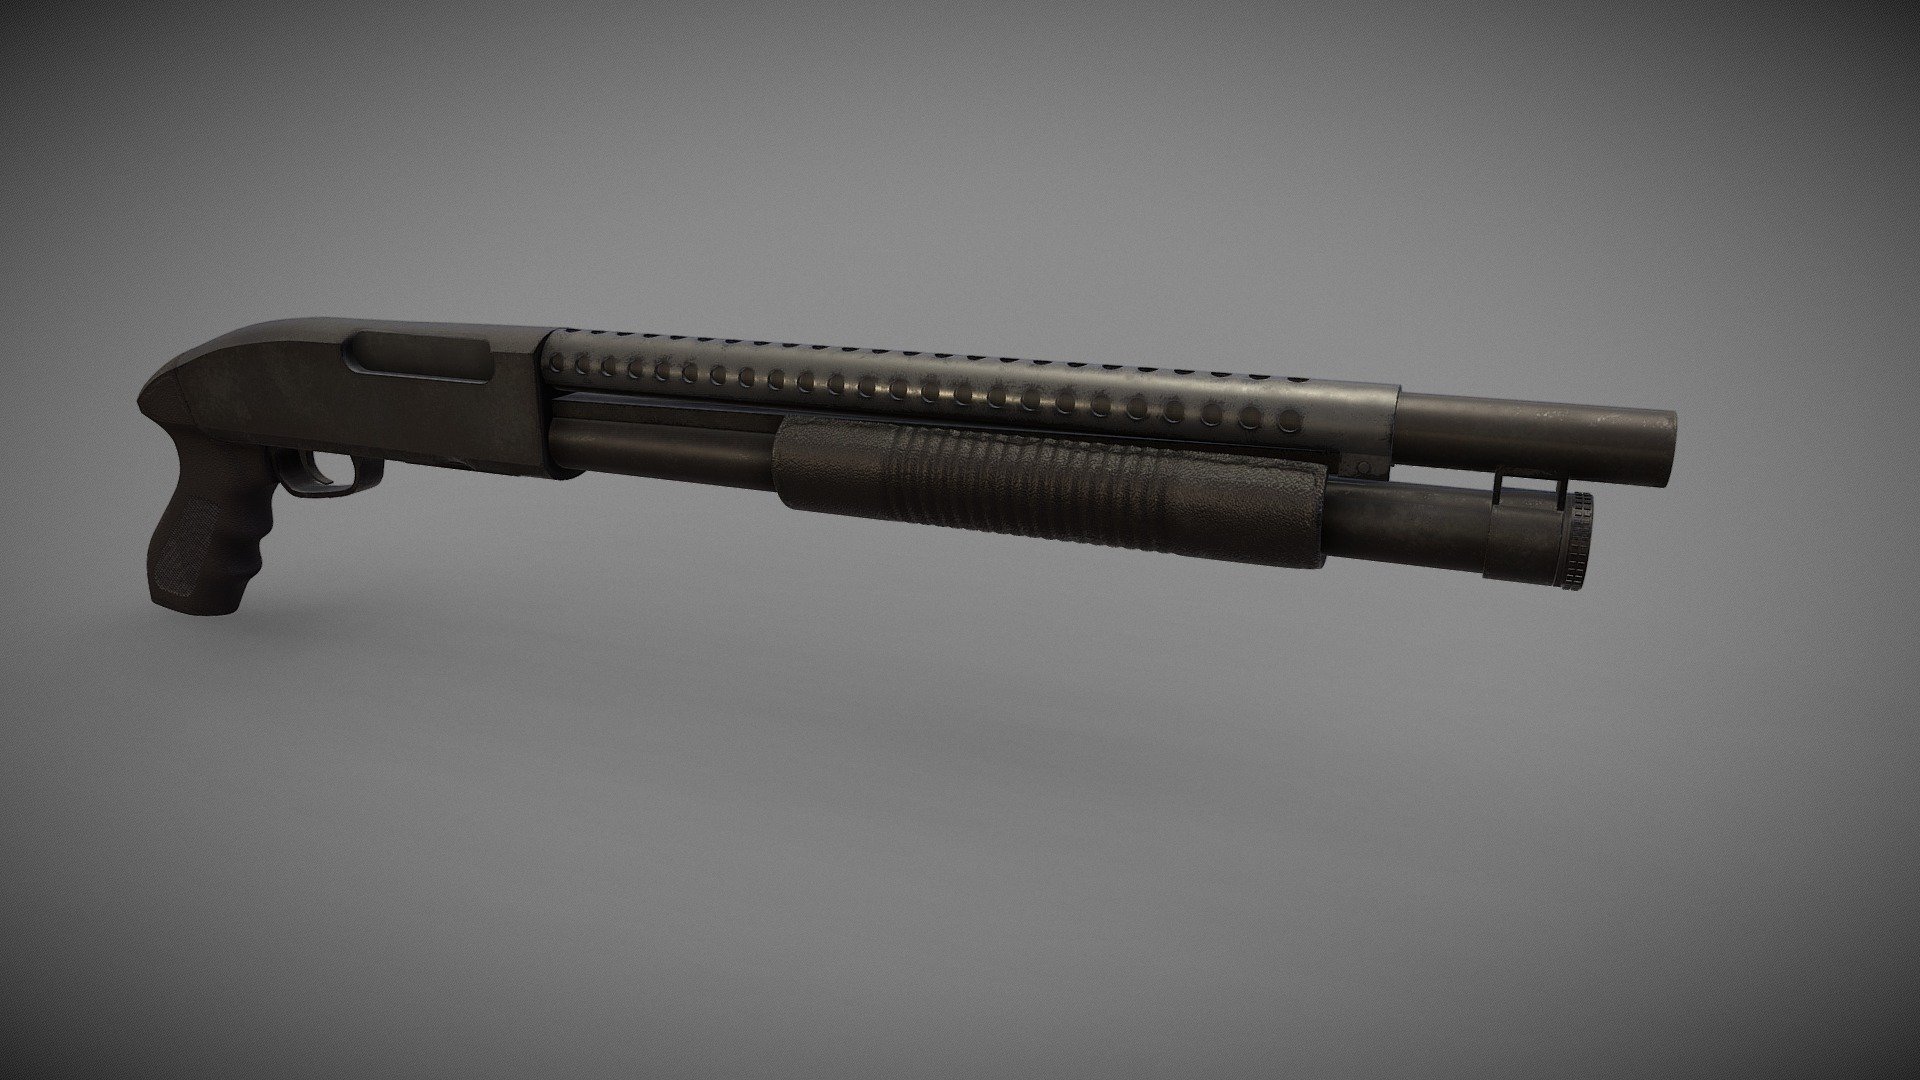 This model was created in fusion 360, A shotgun (also known as a scattergun, or historically as a fowling piece) is a long-barreled firearm designed to shoot a straight-walled cartridge known as a shotshell.
Softwares: Fusion 360 &amp; Substance Painter. The model only has one uv. The model has materials applied. The model is high poly. 

Please leave a like and subscribe for more models coming soon 3d model